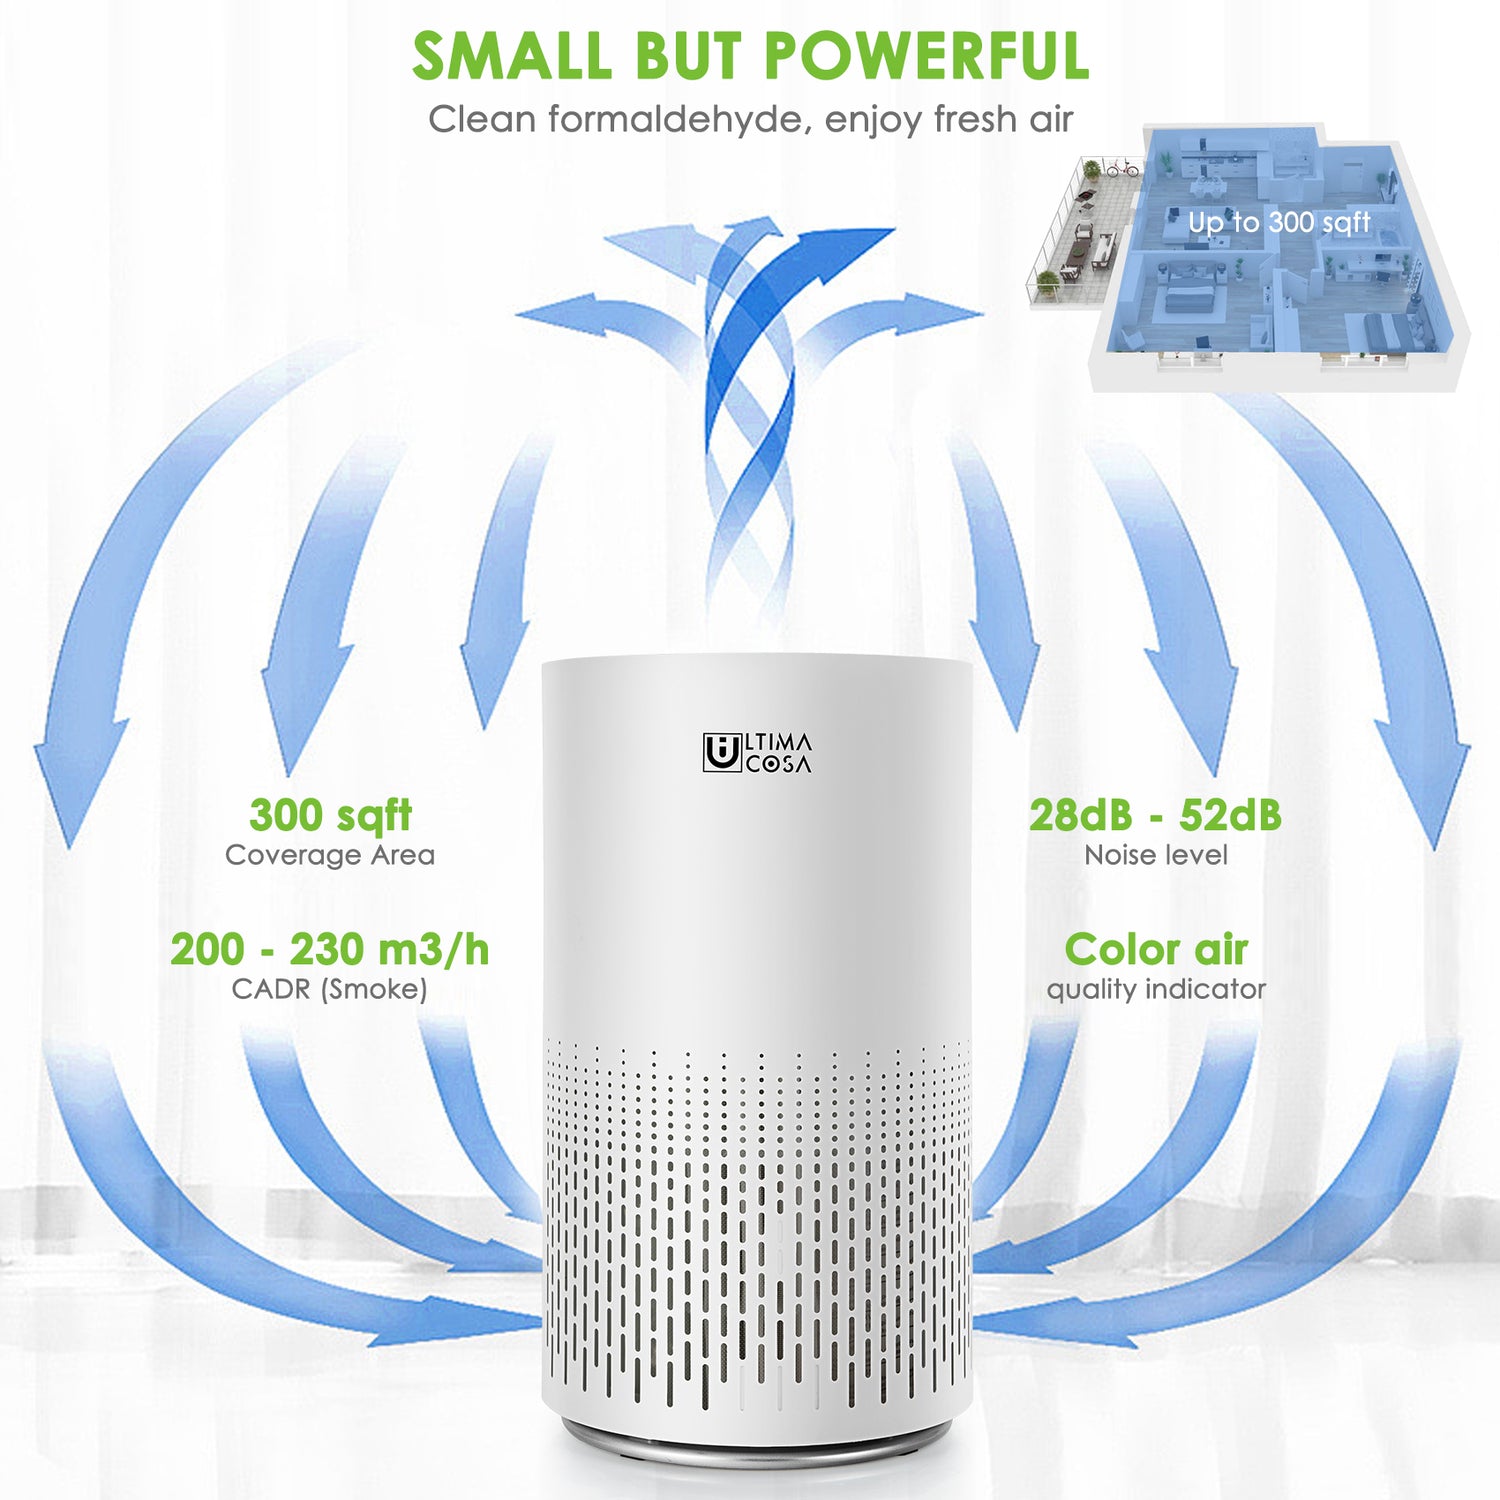 How Can You Tell If an Air Purifier is Working?